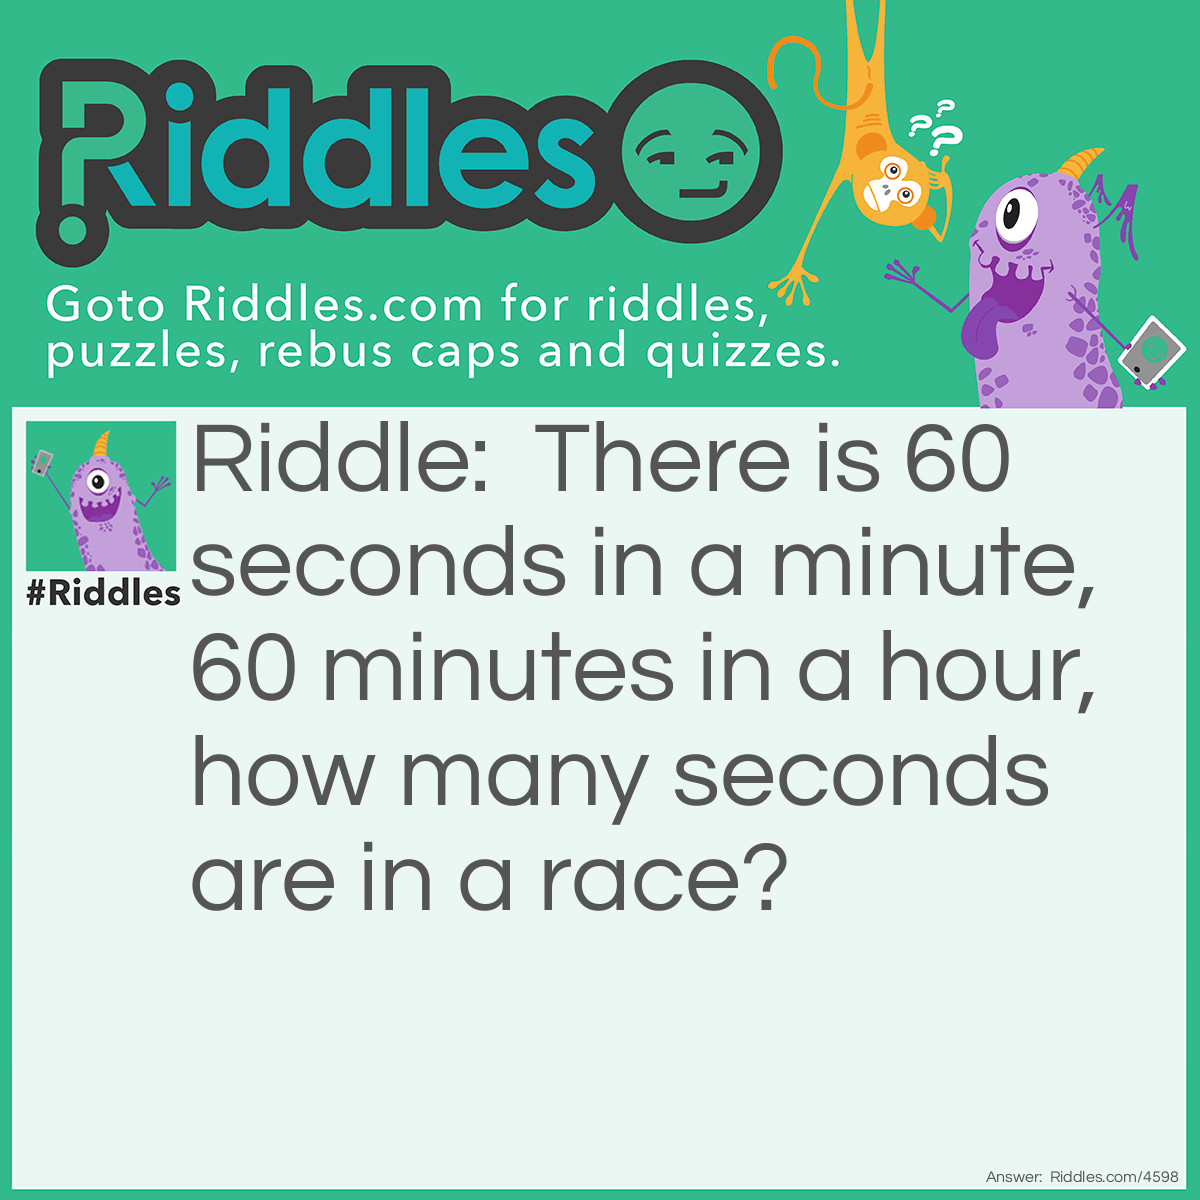 Riddle: There is 60 seconds in a minute, 60 minutes in a hour, how many seconds are in a race? Answer: 1.